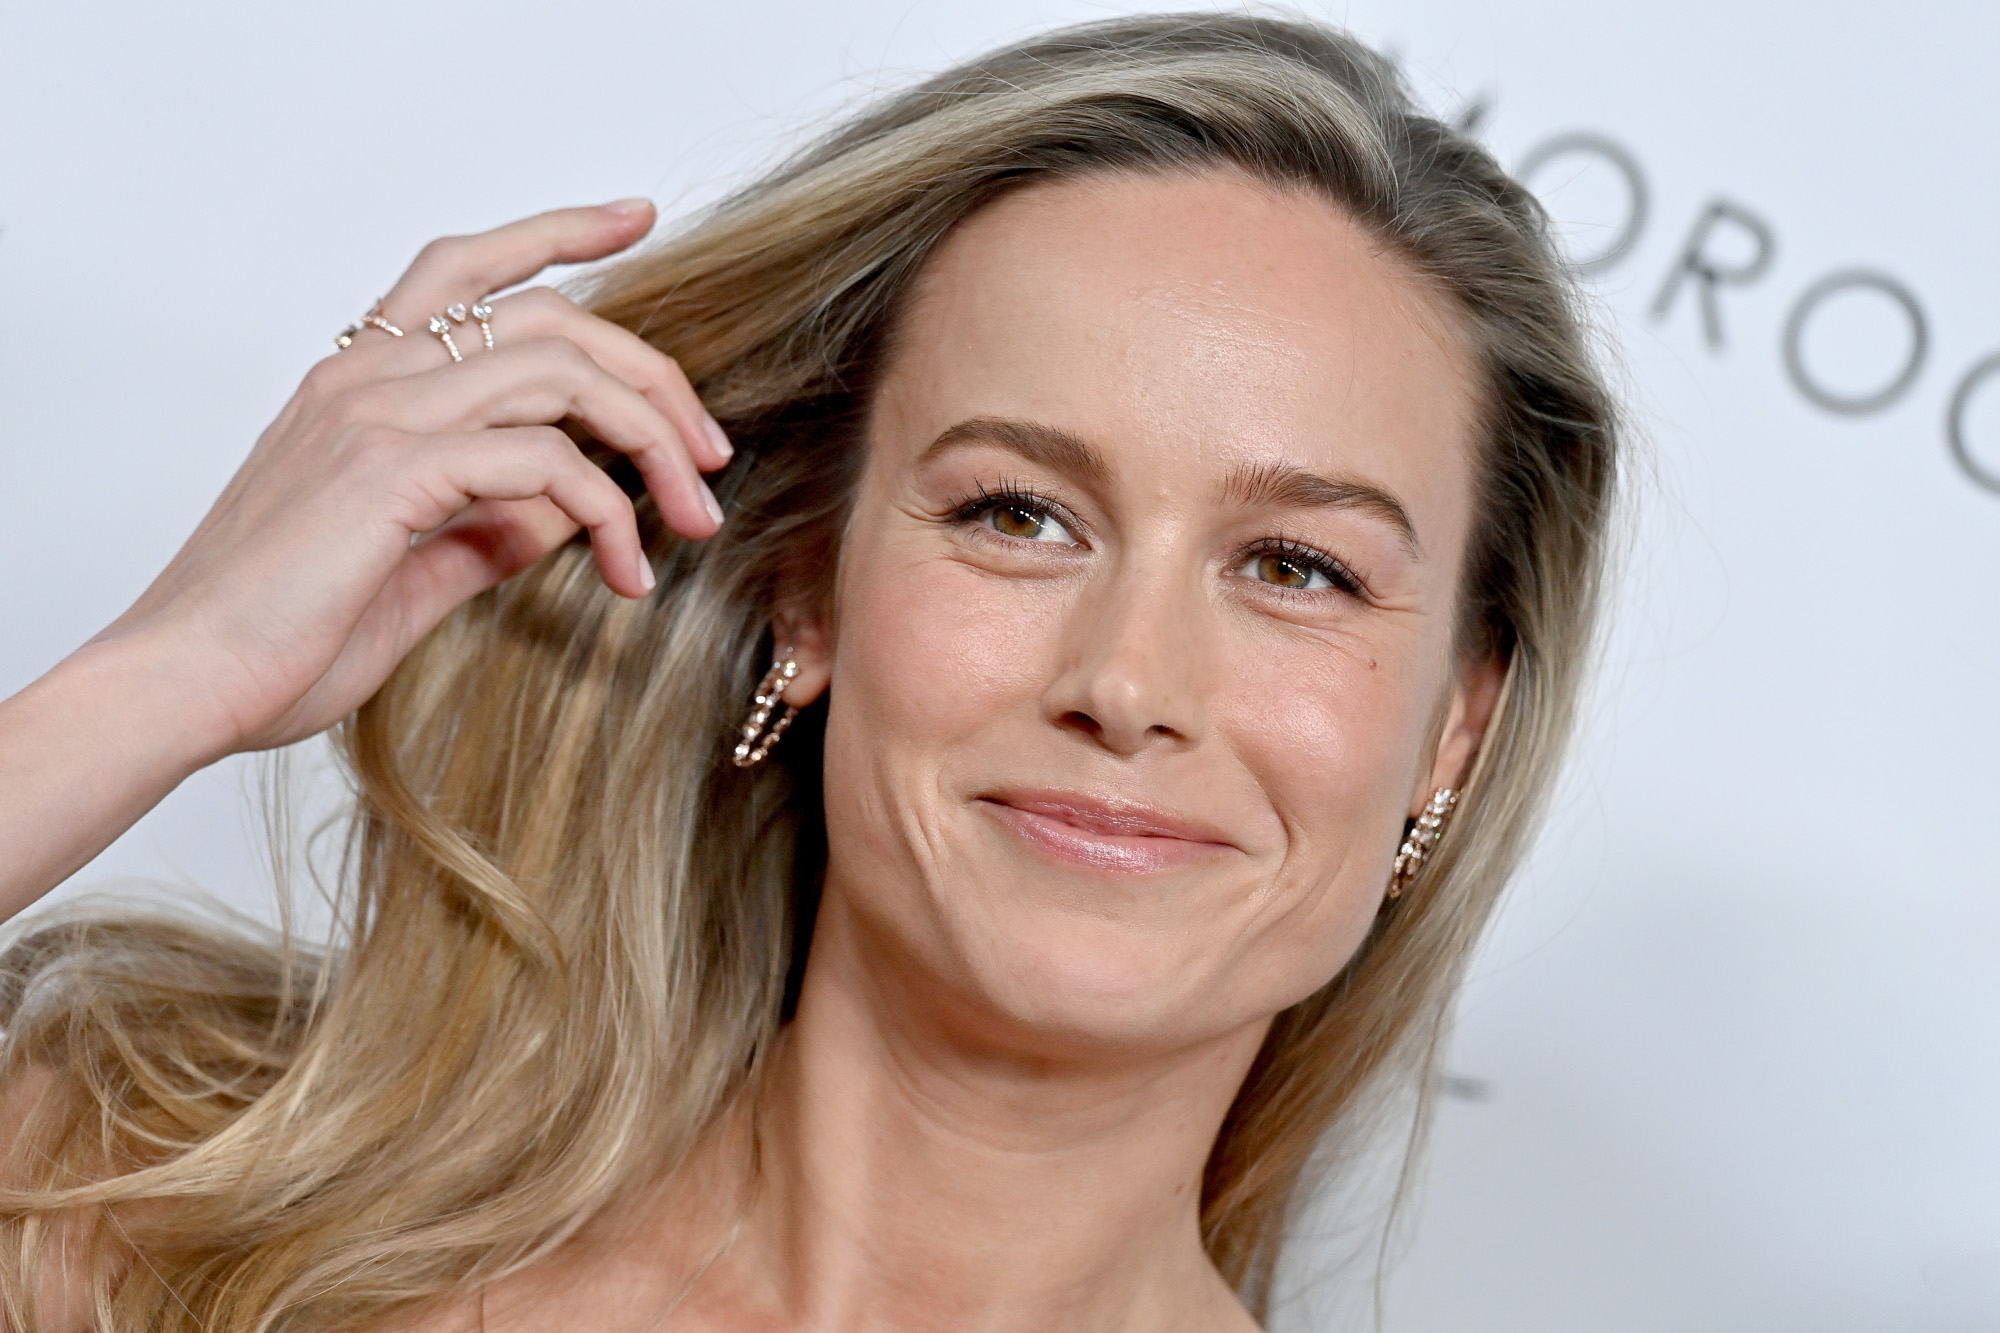 Brie Larson, star of 'The Marvels,' which has a 2023 release date. In the photo, her blonde hair is down and she's smiling.